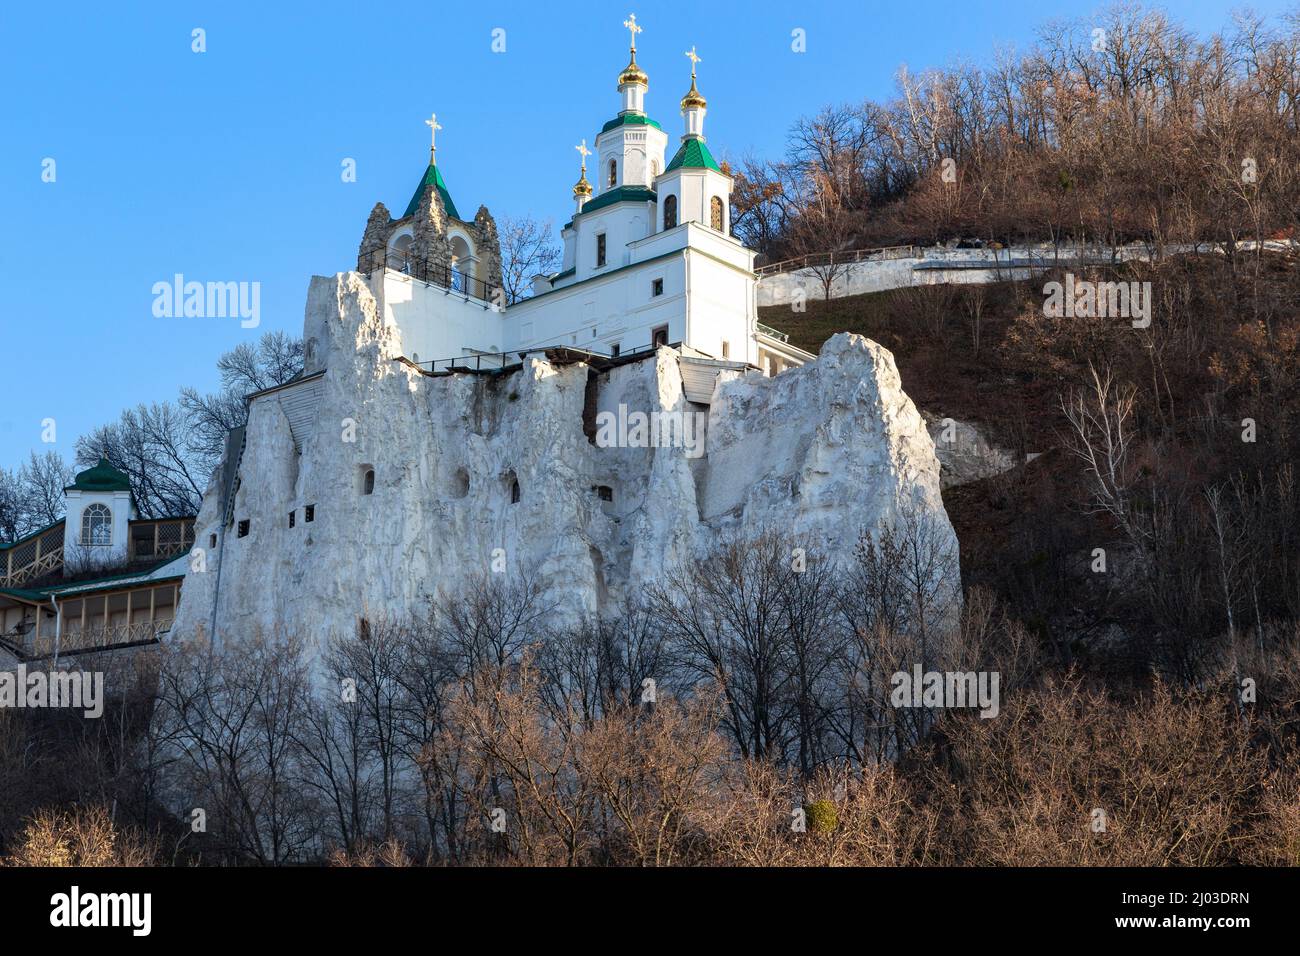 SVYATOGORSK, UKRAINE - OCTOBER 30, 2021: This is the St. Nicholas Church and the chapel of St. Andrew Svyatogorsk Lavra on the top of a chalk mountain Stock Photo